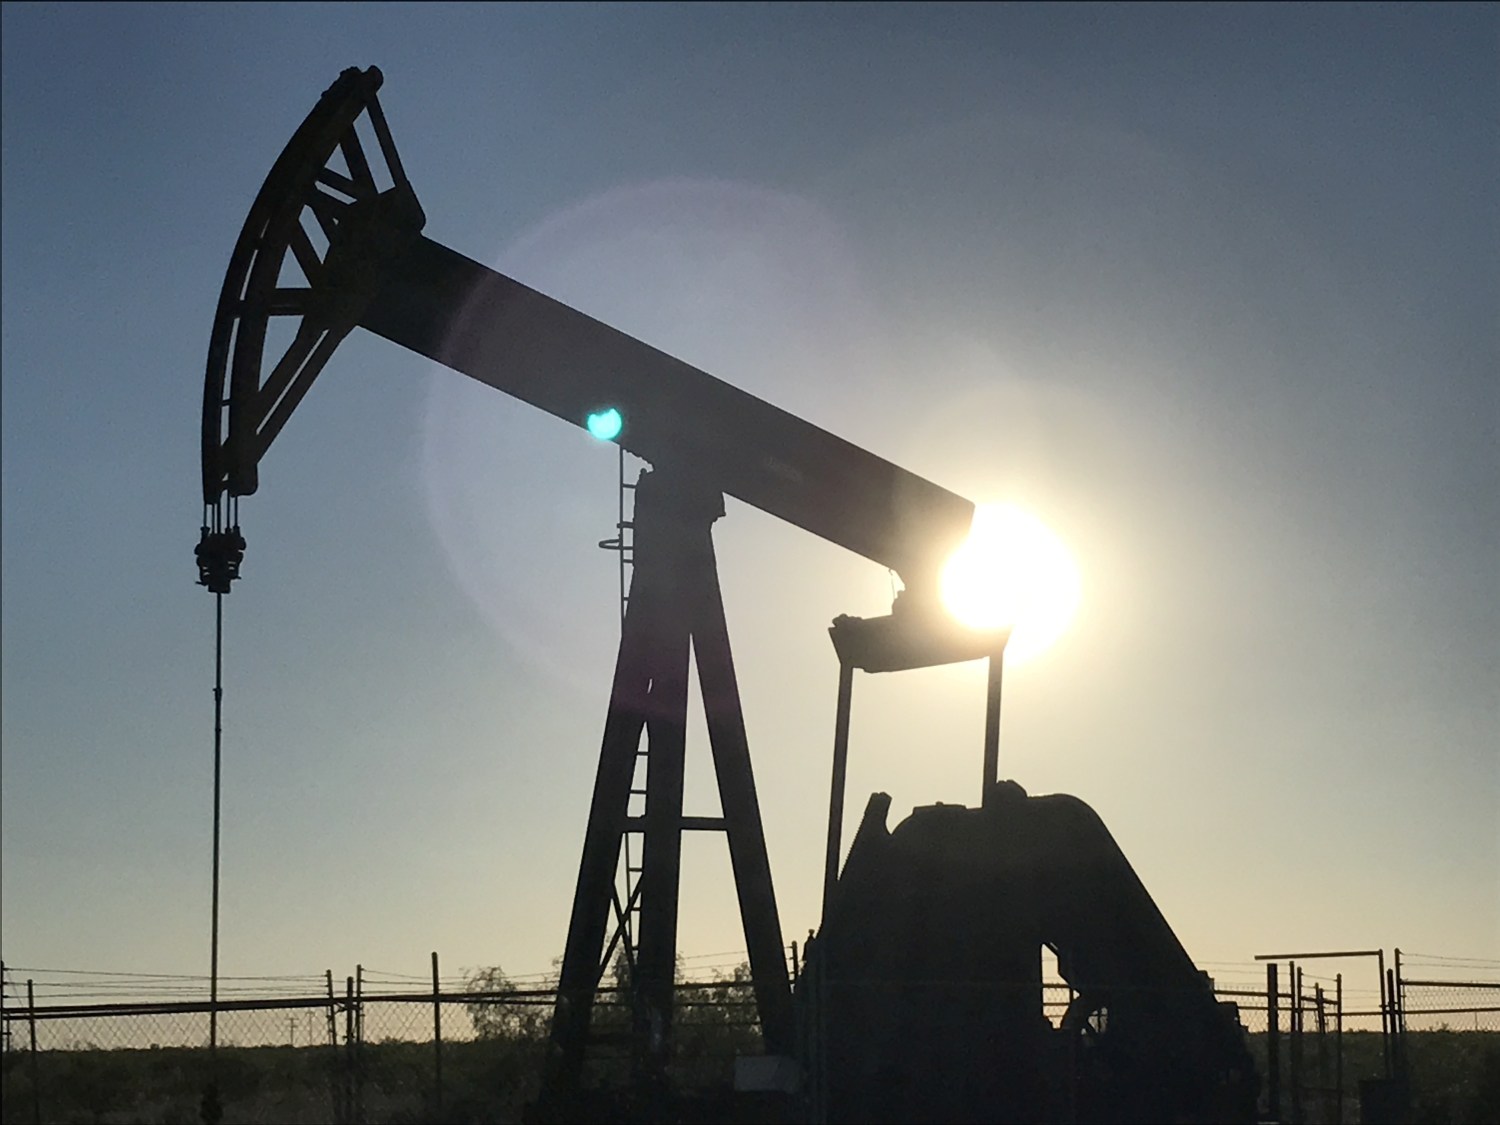 An oil pump at sunrise, owned by Parsley Energy Inc. near Midland, Texas, U.S., May 3, 2017. Picture taken May 3, 2017. REUTERS/Ernest Scheyder - RC1509840B40